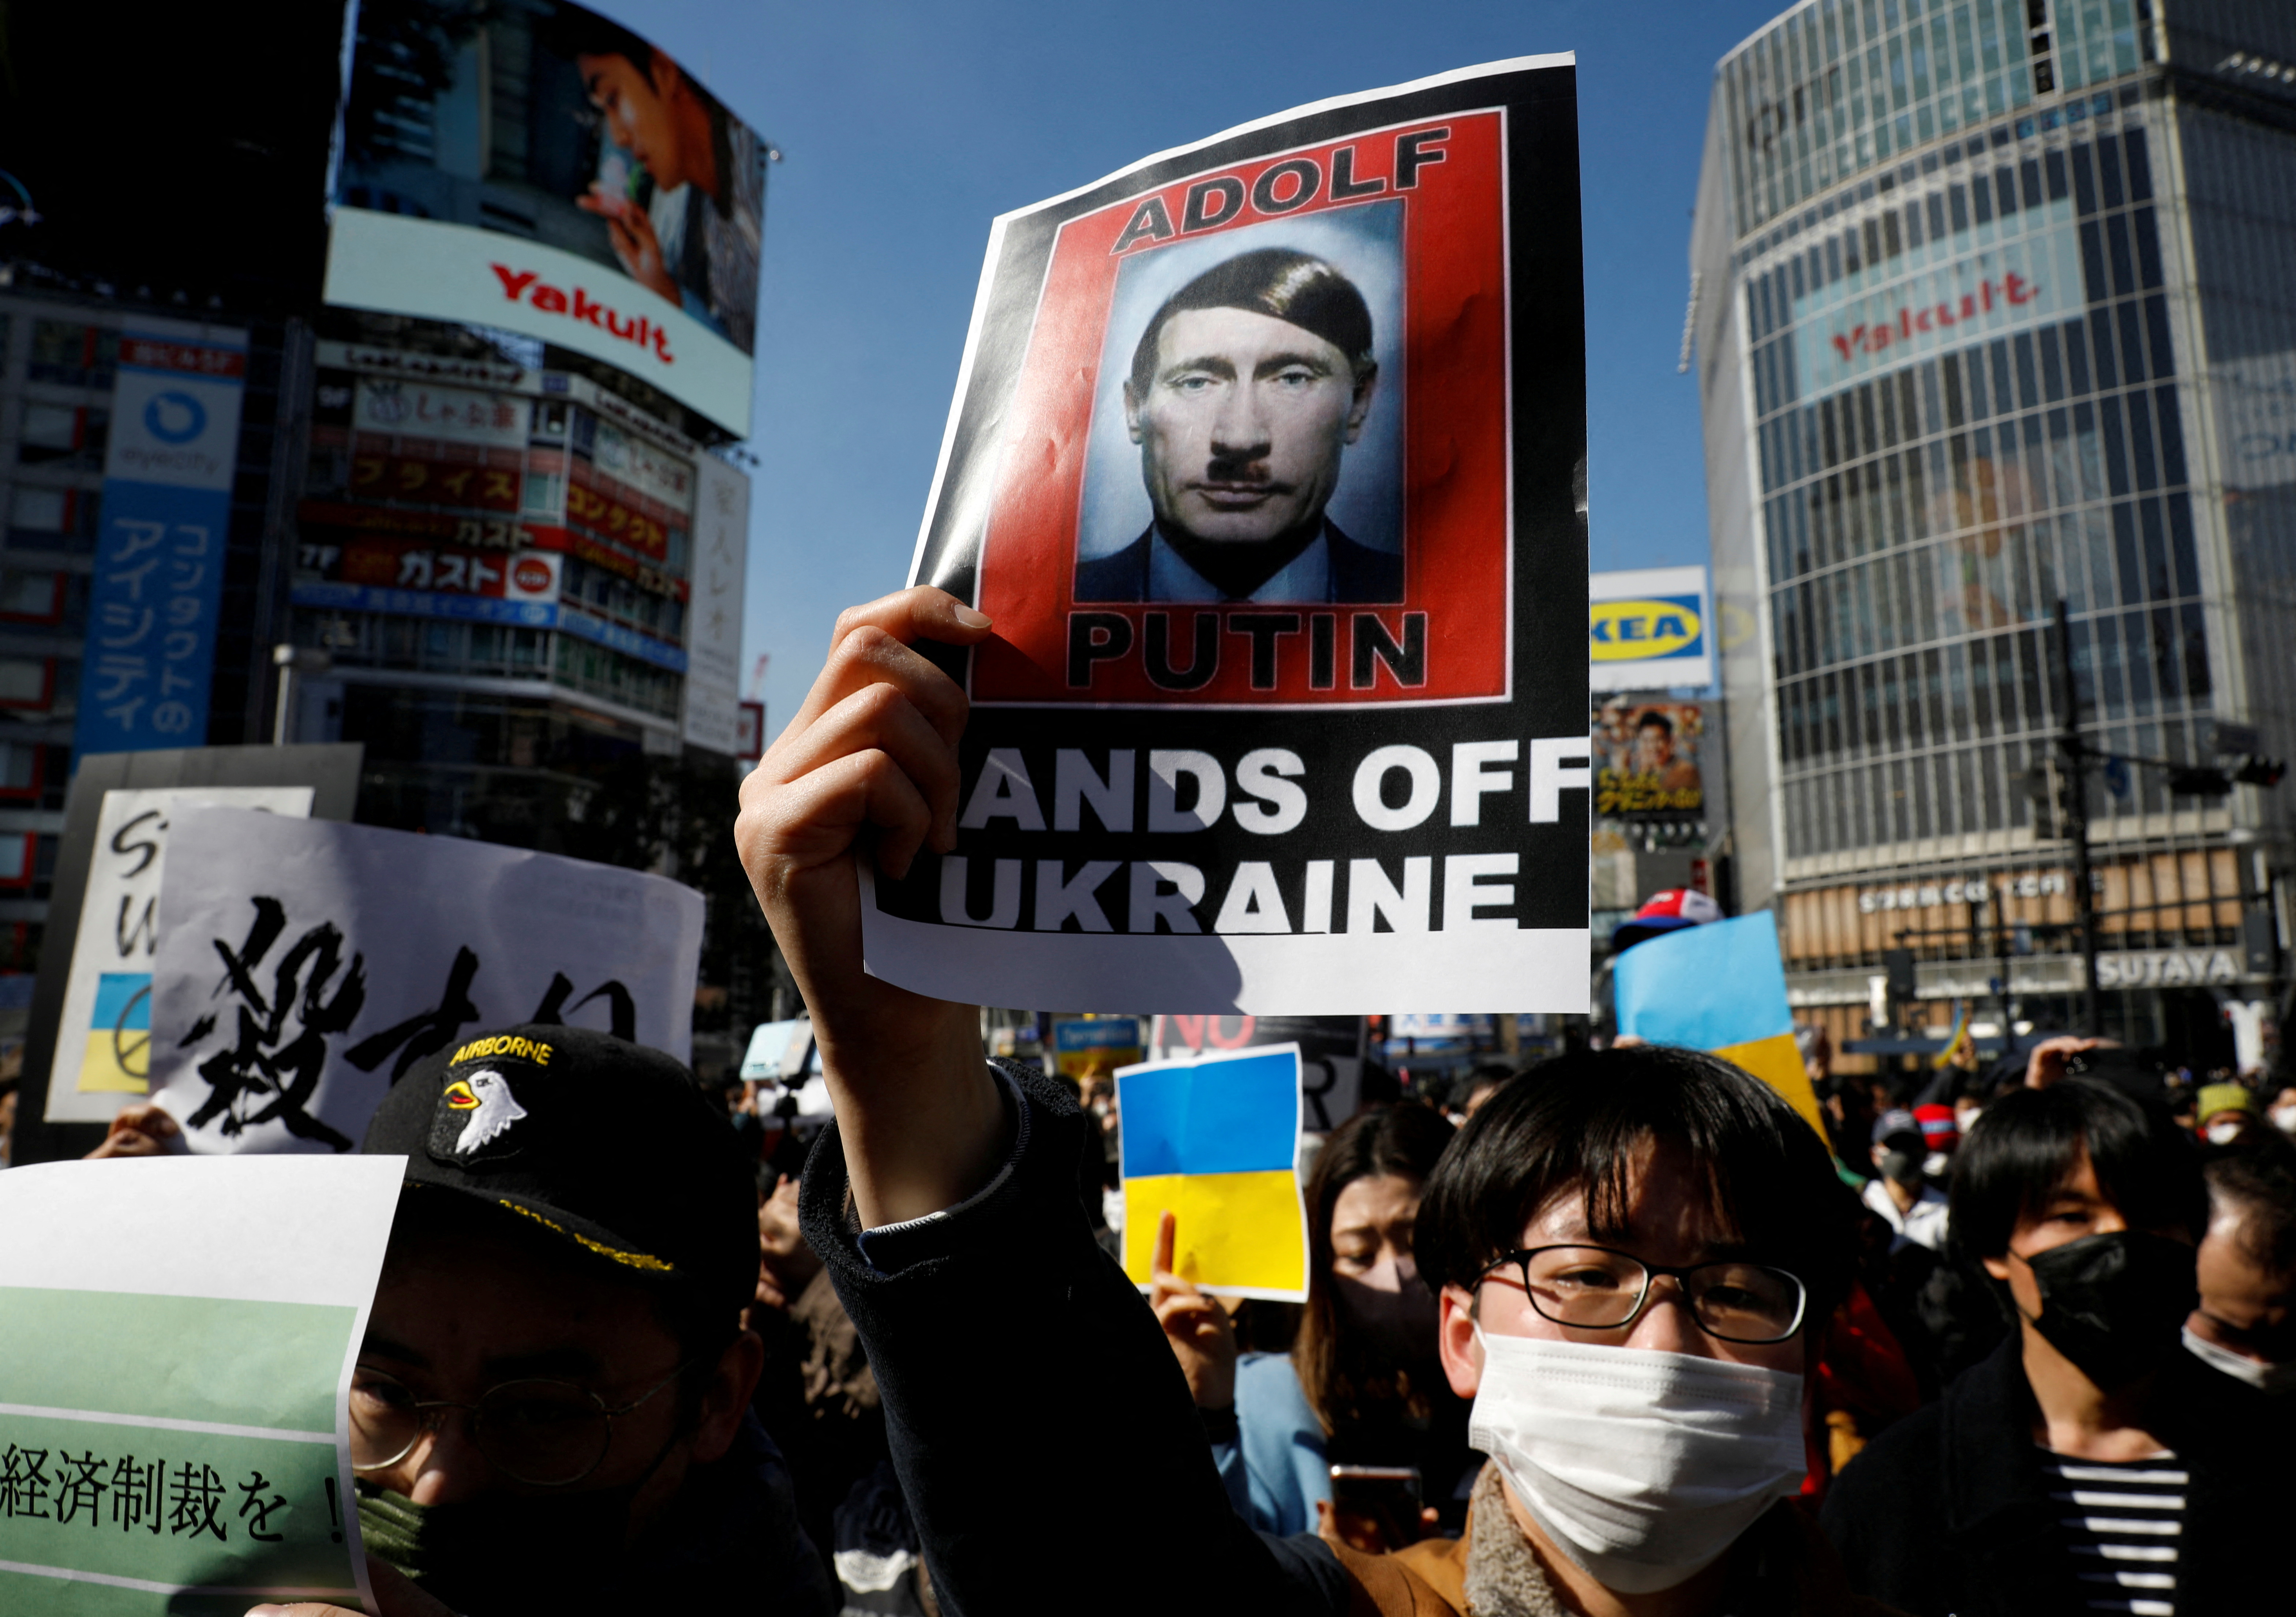 A rally against Russia's invasion of Ukraine in Tokyo